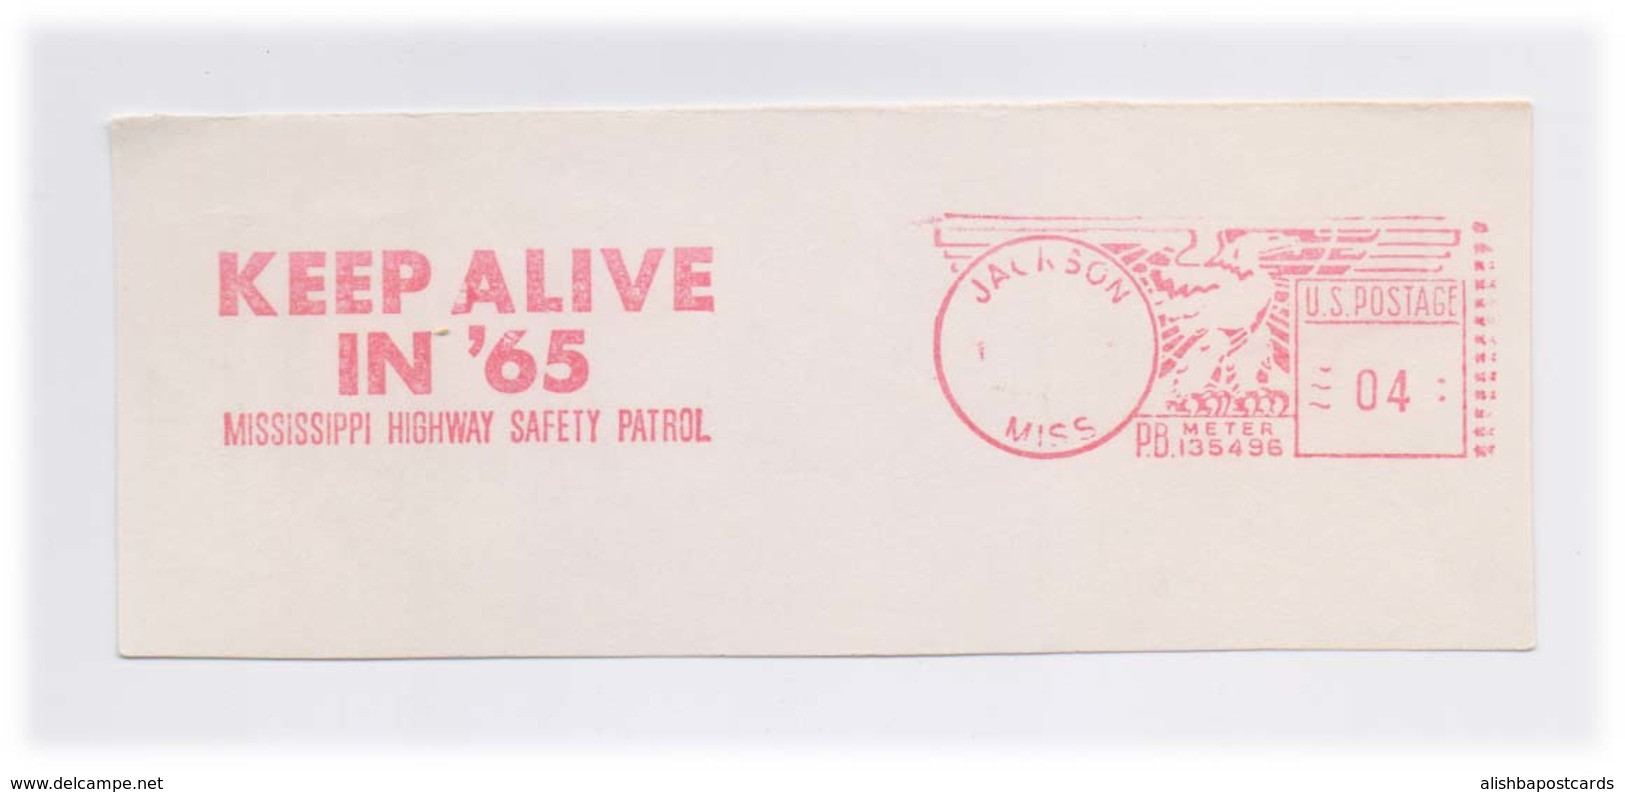 EMA Meter Frank Front Cover Cut Red Meter Mark Keep Alive In 65 Mississippi Highway Safety Patrol Slogan US POSTAGE - Accidents & Road Safety